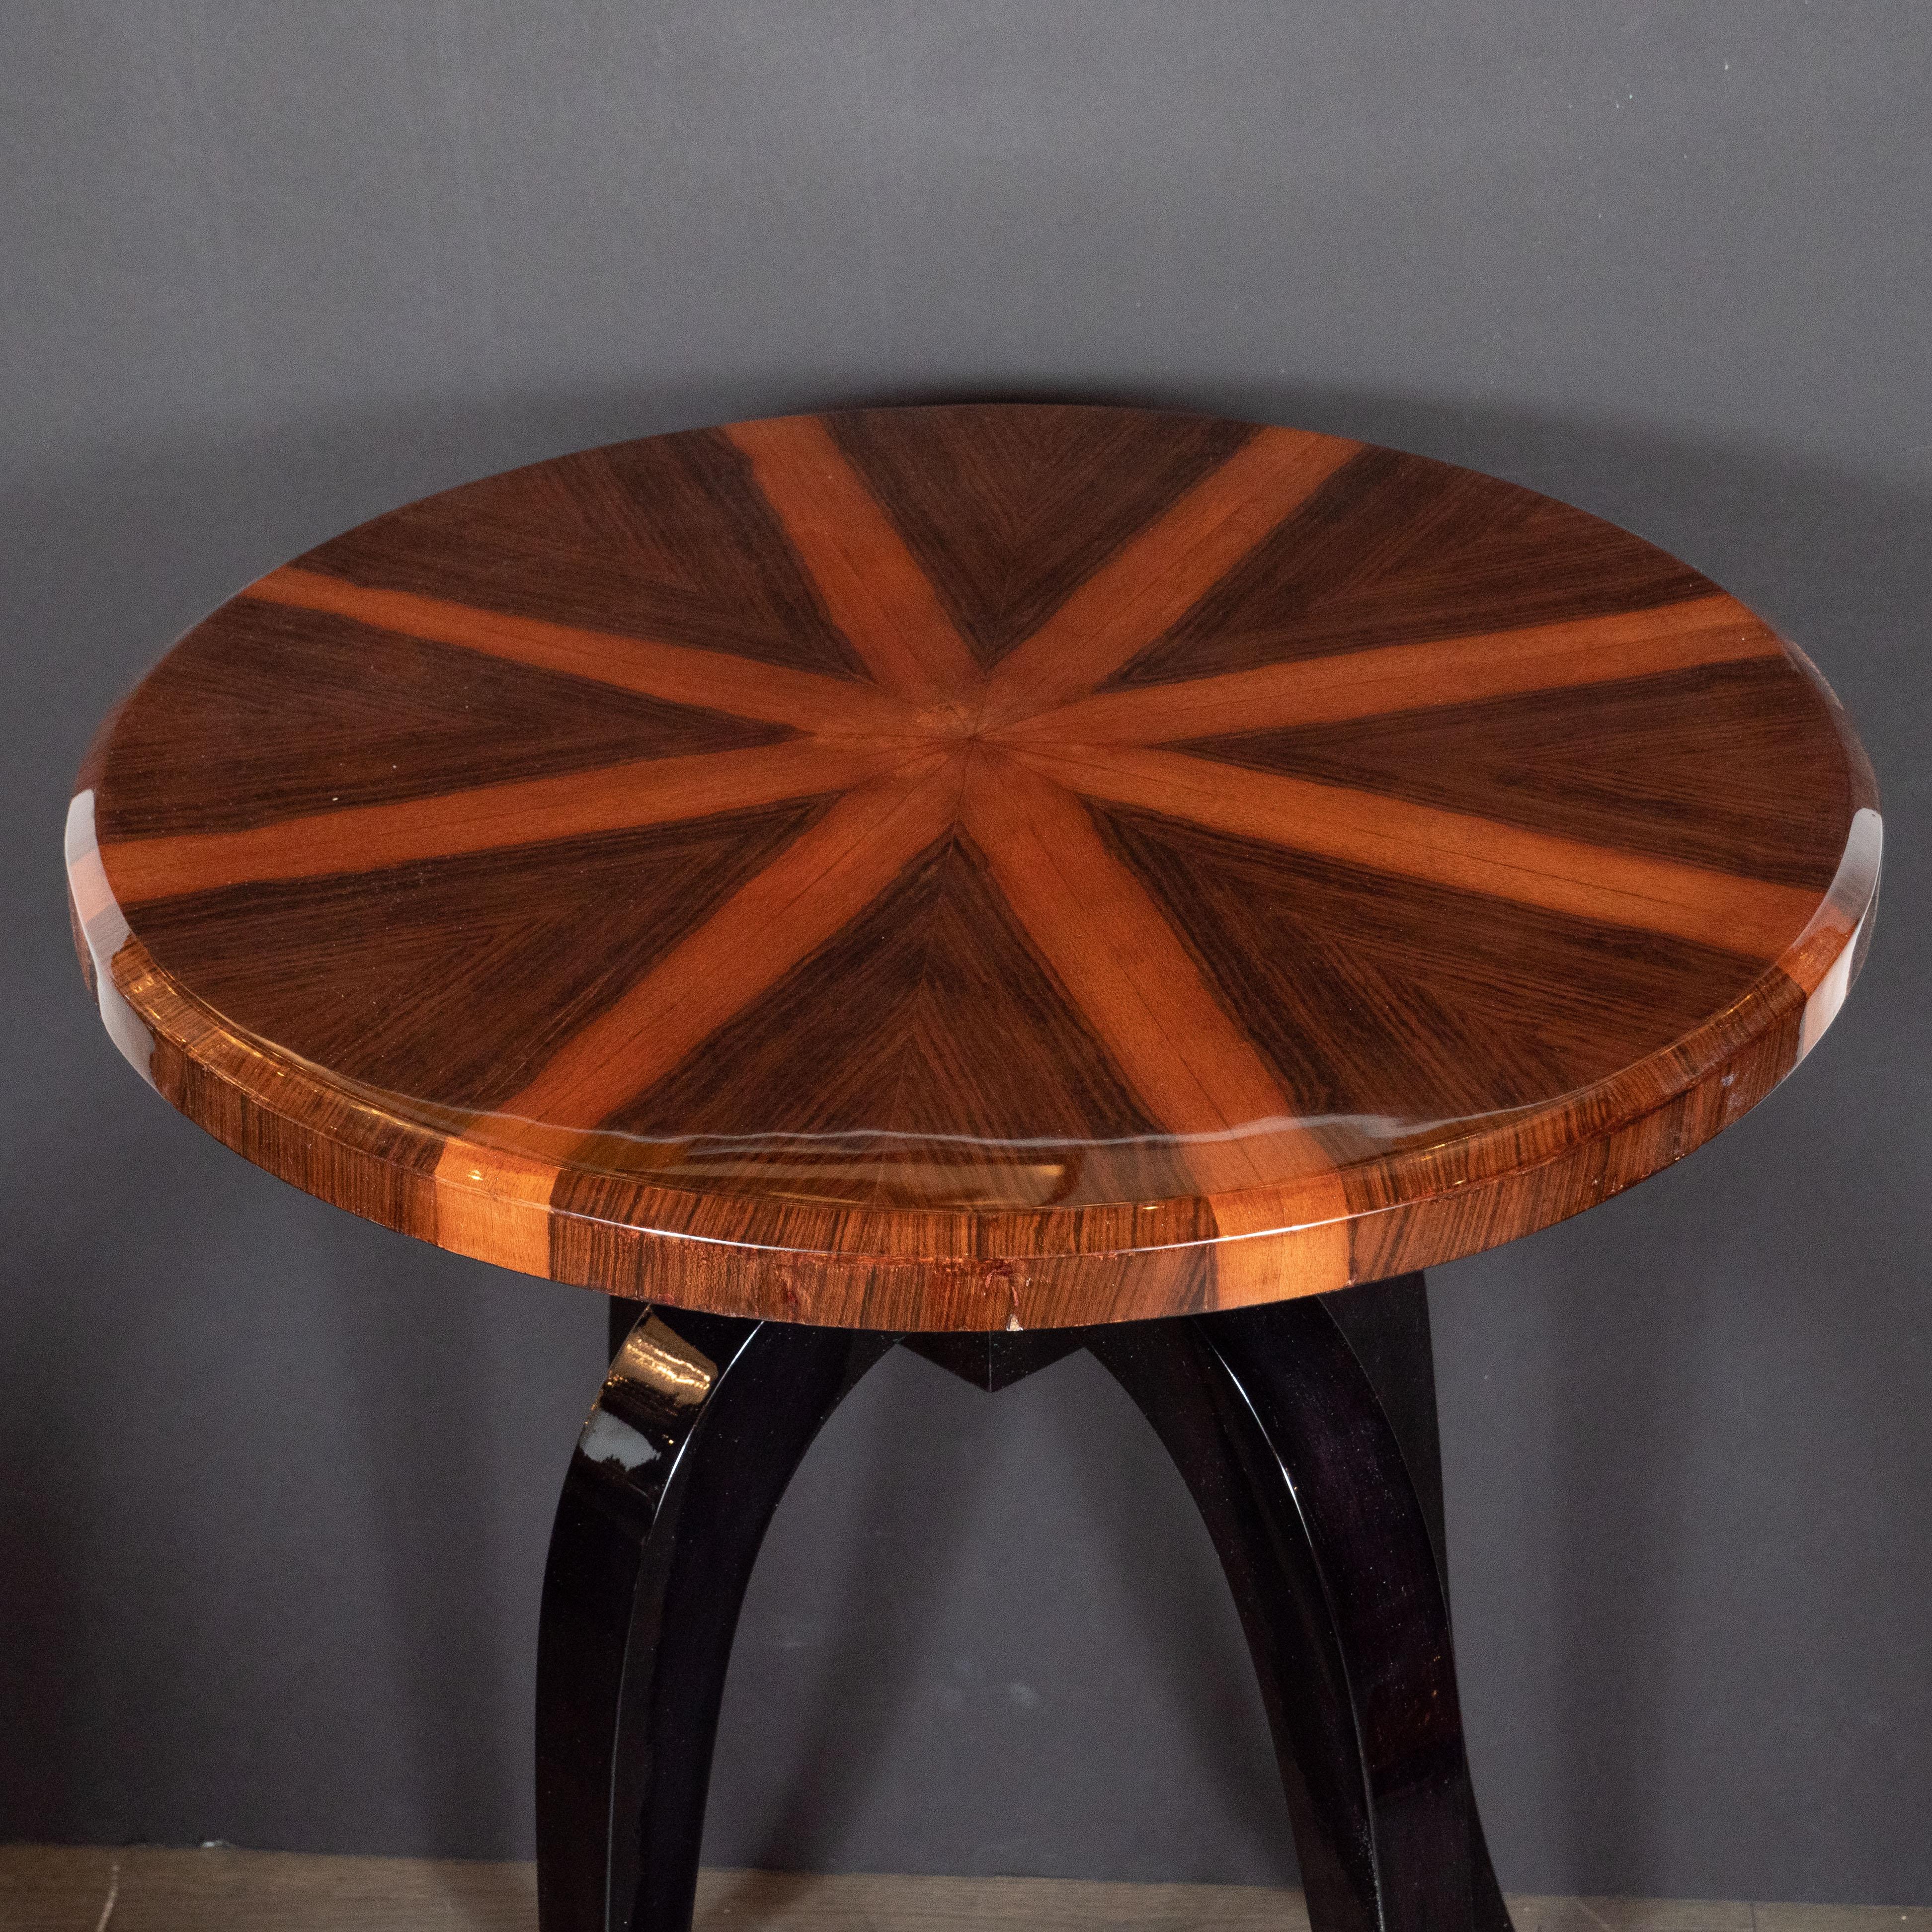 Mid-20th Century Art Deco Gueridon Table with Bookmatched Starburst Walnut and Carpathian Elm Top